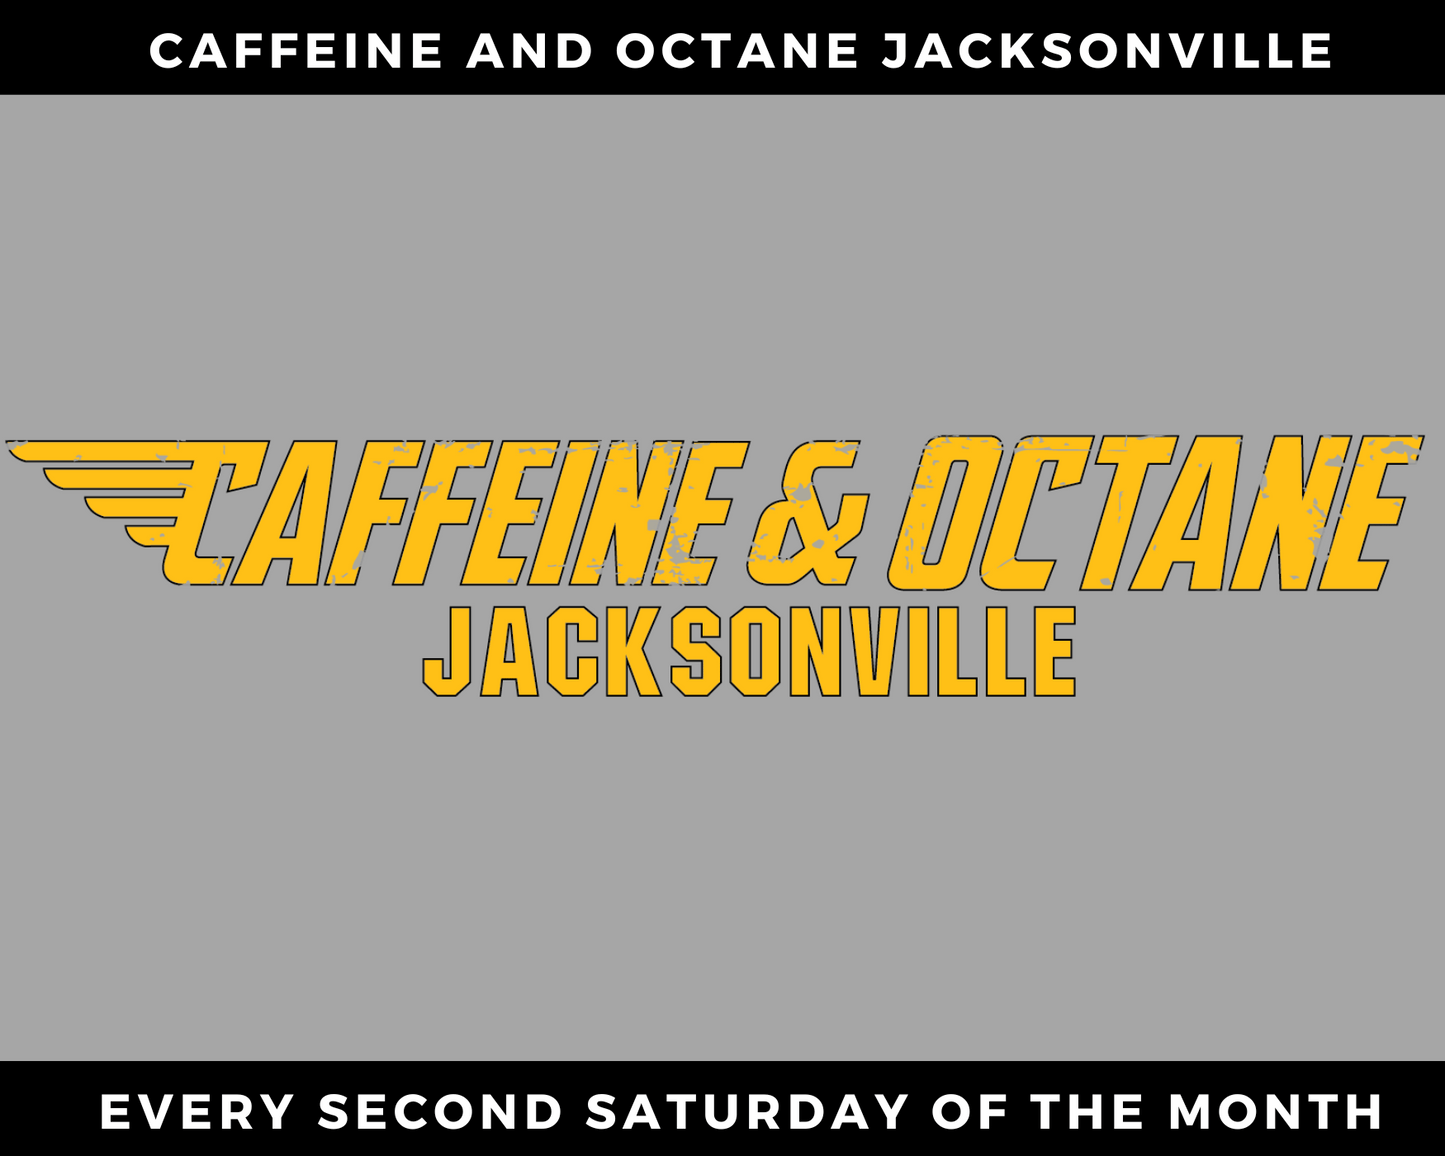 Caffeine and Octane Jacksonville - The Avenues Mall